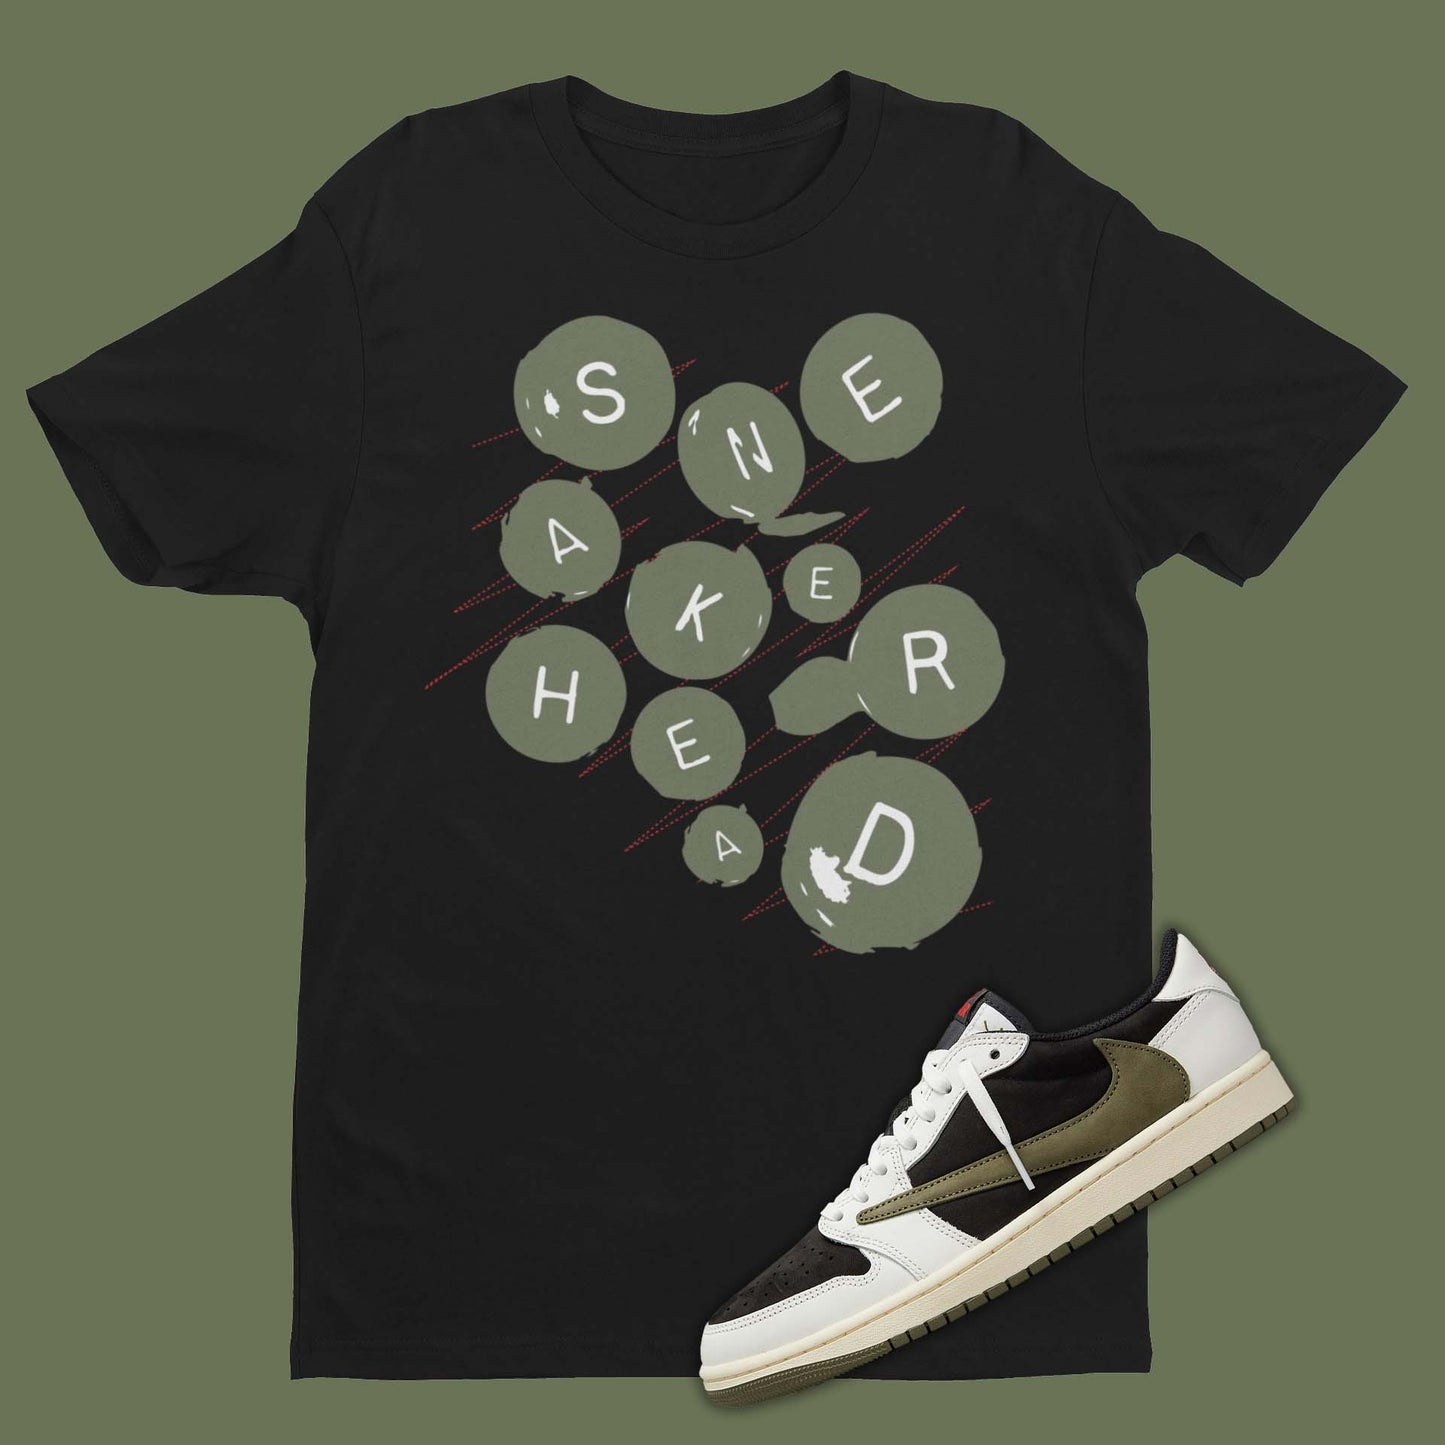 A black cotton crewneck t-shirt with short sleeves, featuring a simple yet stylish design that complements the black, white and red colorway of the Travis Scott Jordan 1 Olive sneakers. The t-shirt has a comfortable and relaxed fit, perfect for casual outings or everyday wear.